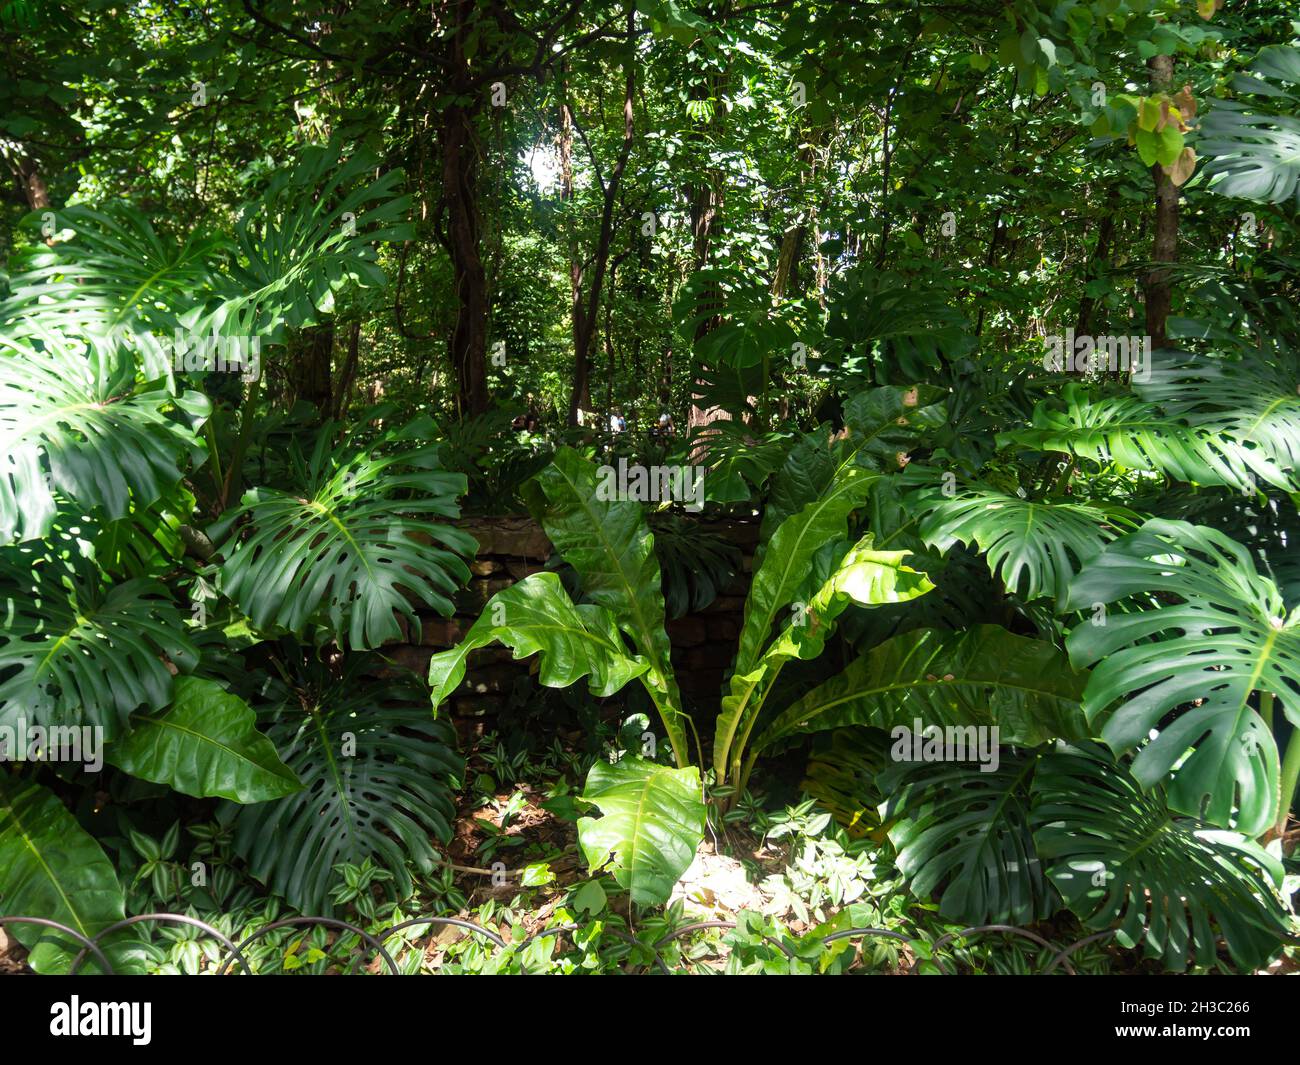 Swiss Cheese Plant (Monstera deliciosa) in the Garden with other Trees and Plants Stock Photo